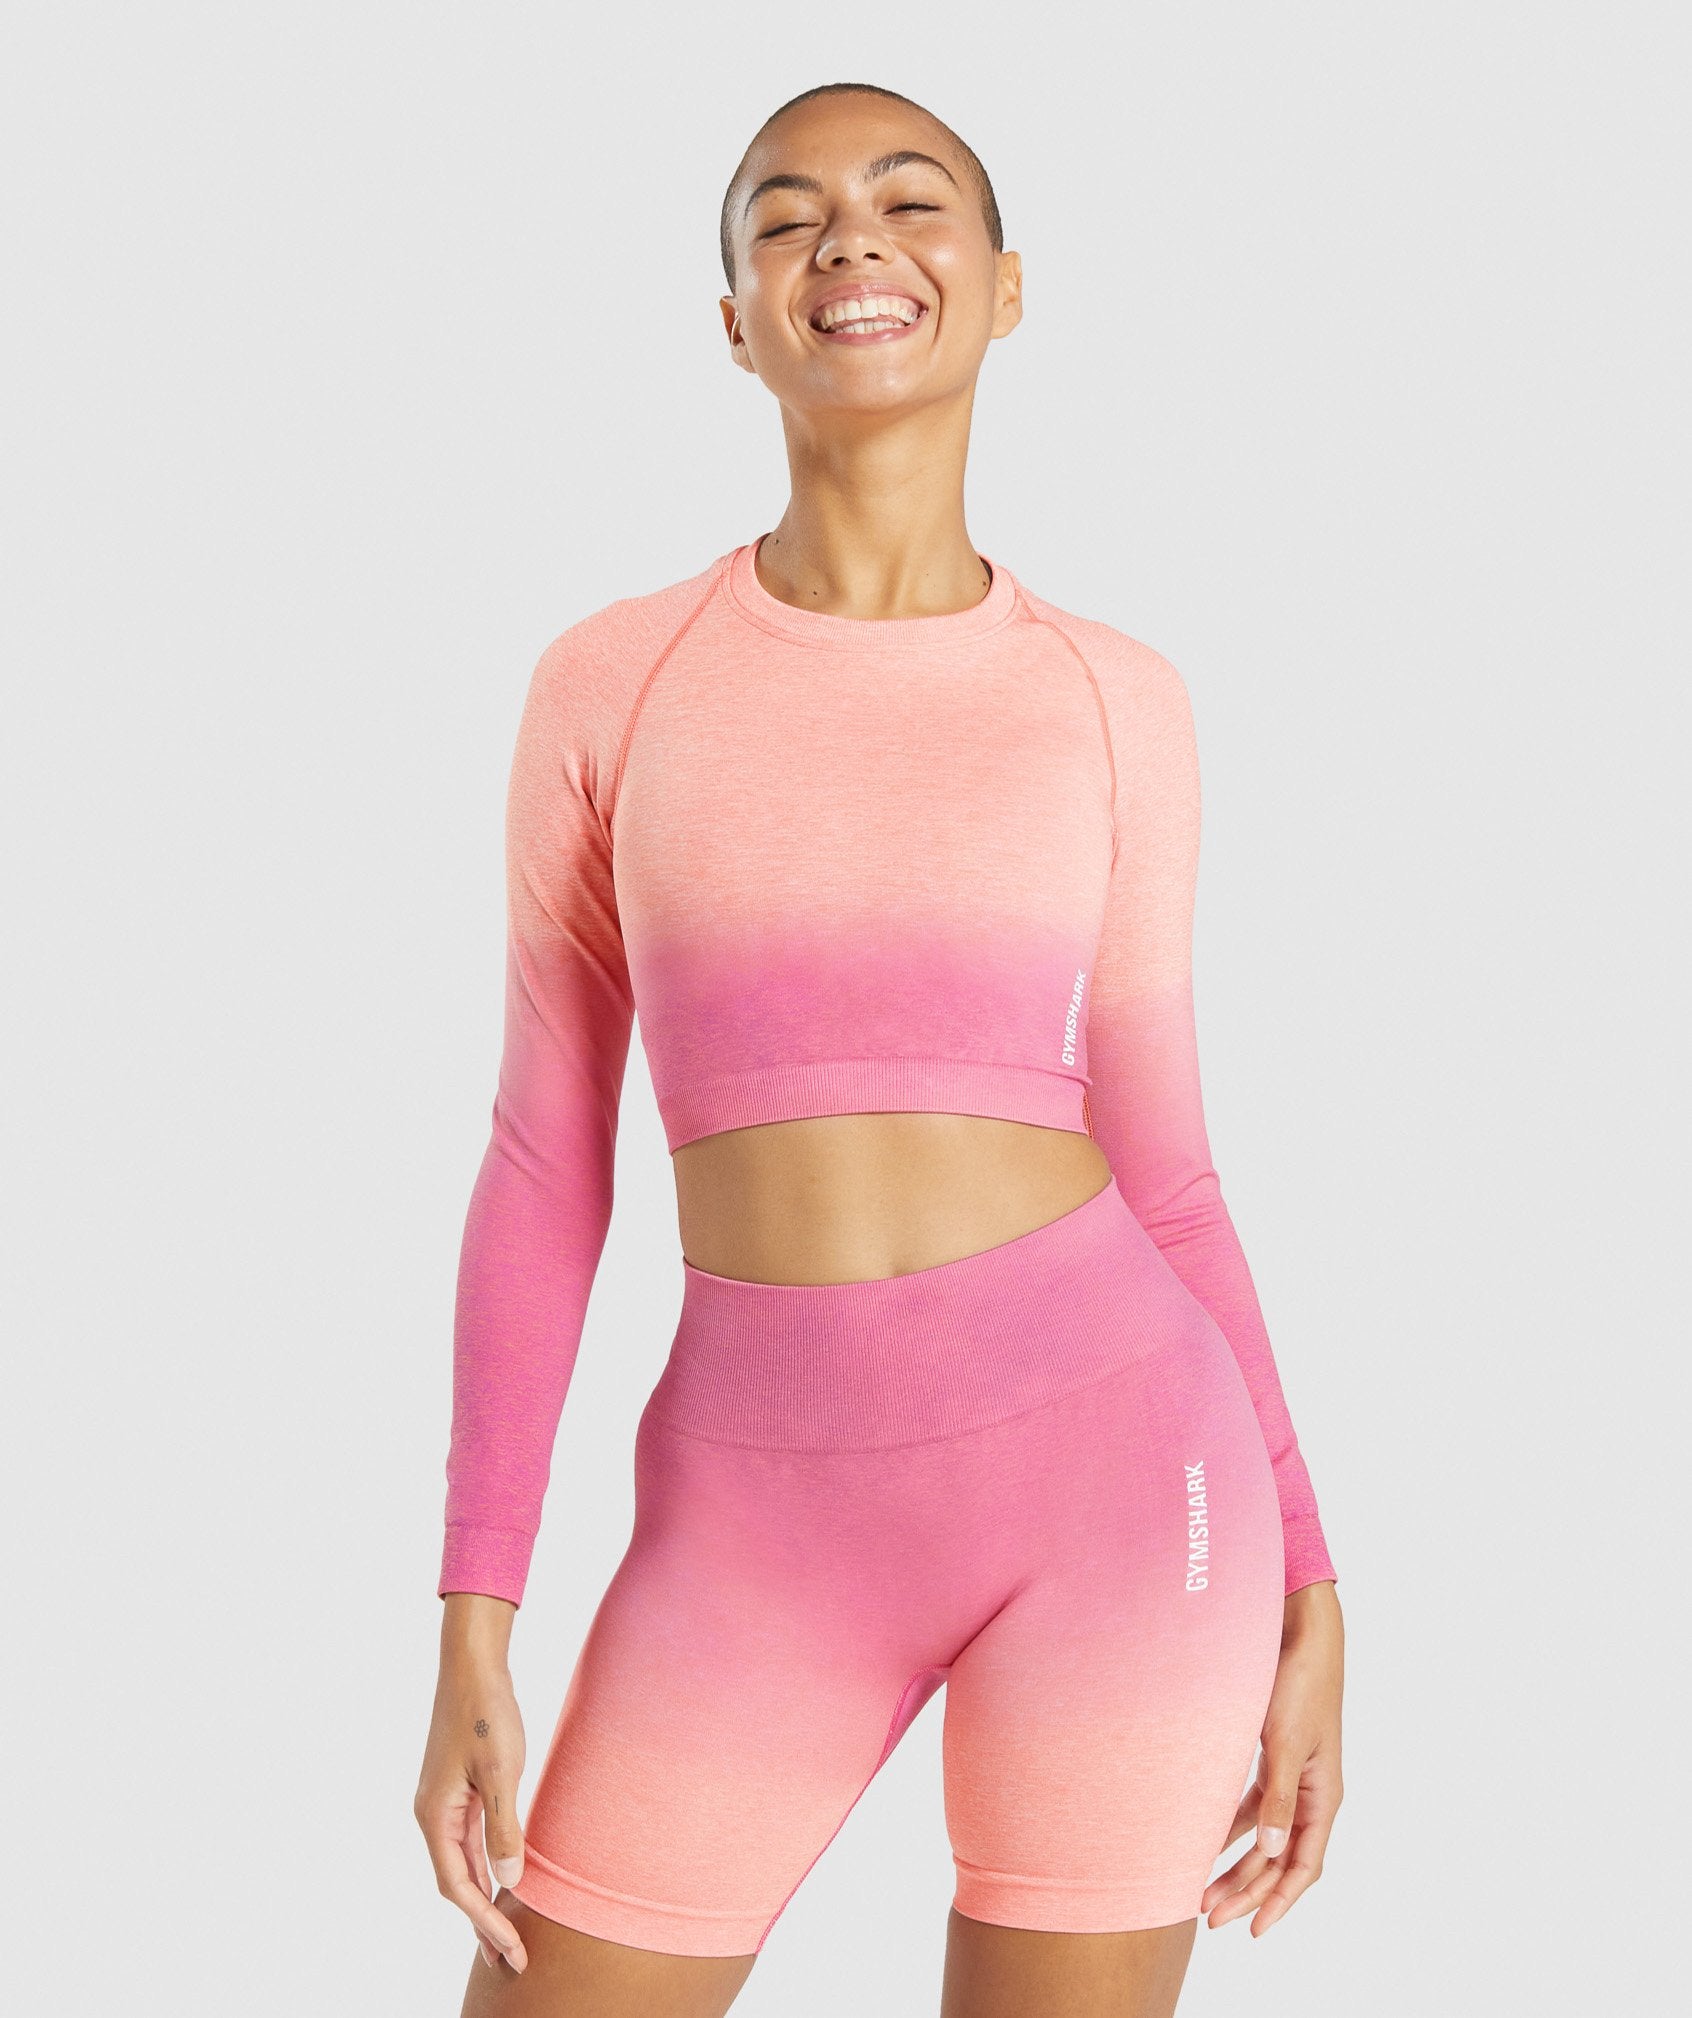 Gymshark Cropped Top Orange Size XS - $22 (26% Off Retail) - From Kaylyn